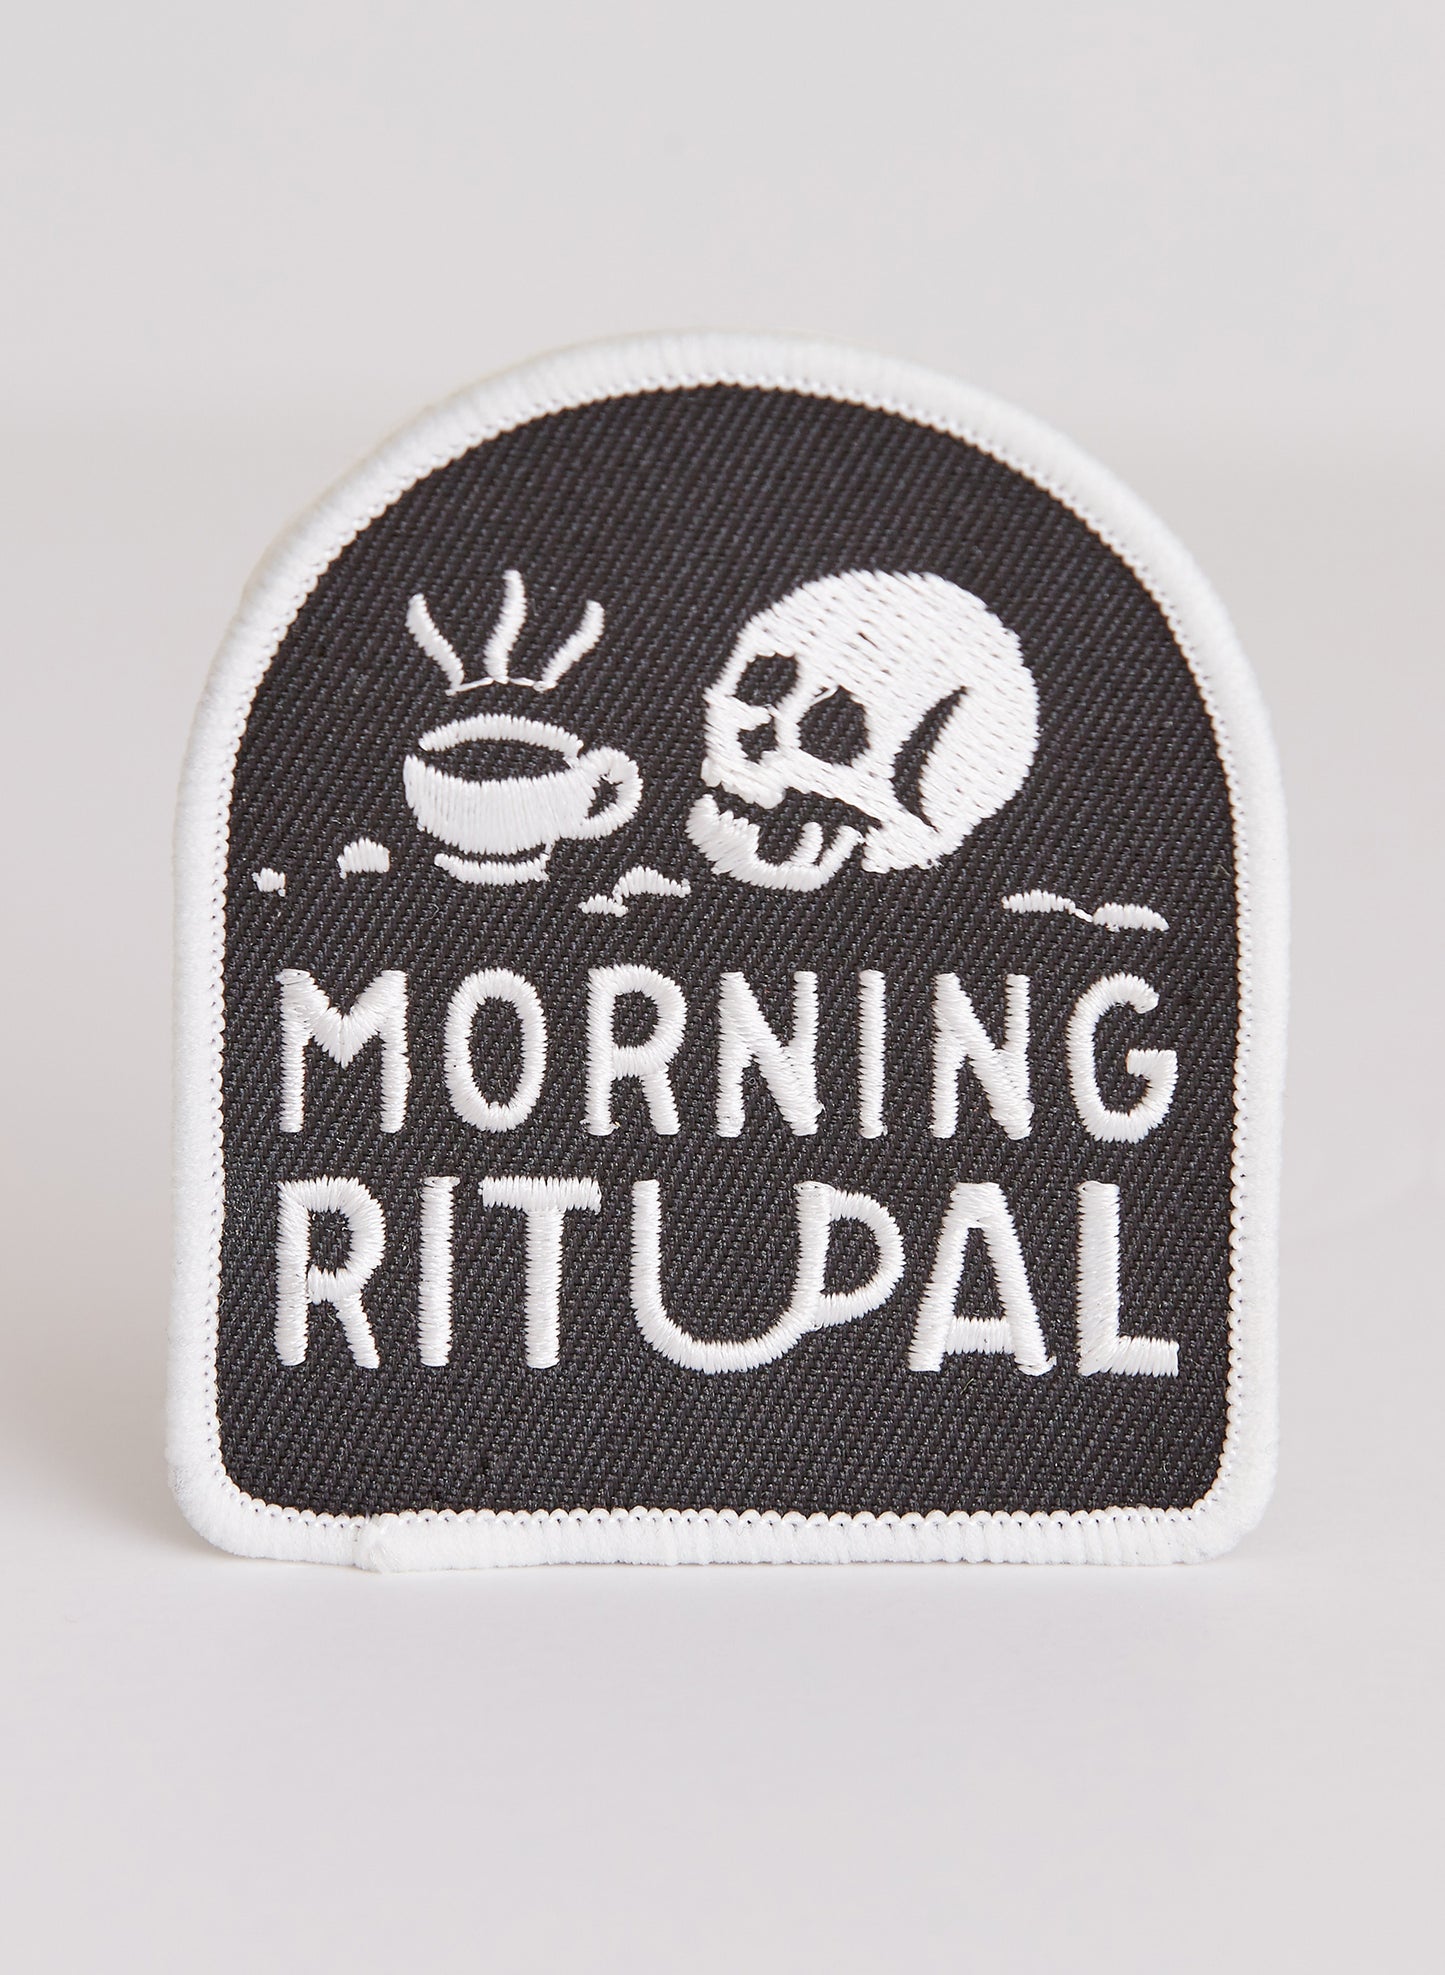 Morning Ritual Coffee Embroidered Iron-on Patch Food Meme Gift